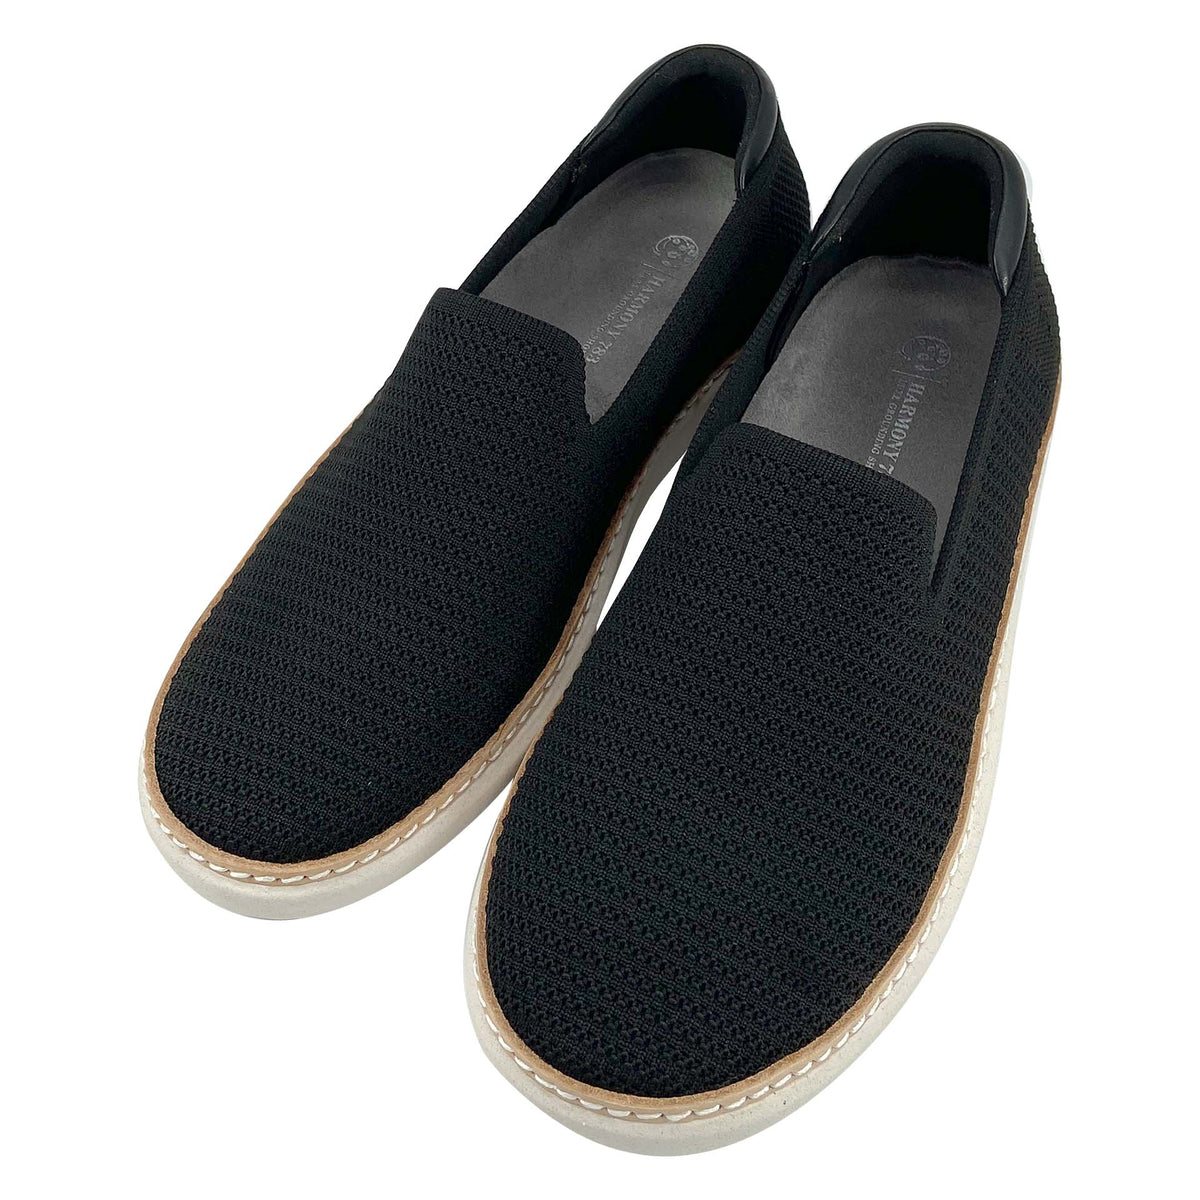 Unisex Bamboo Knit Earthing On-the-Go Slip-On by Harmony783 – Moccasins ...